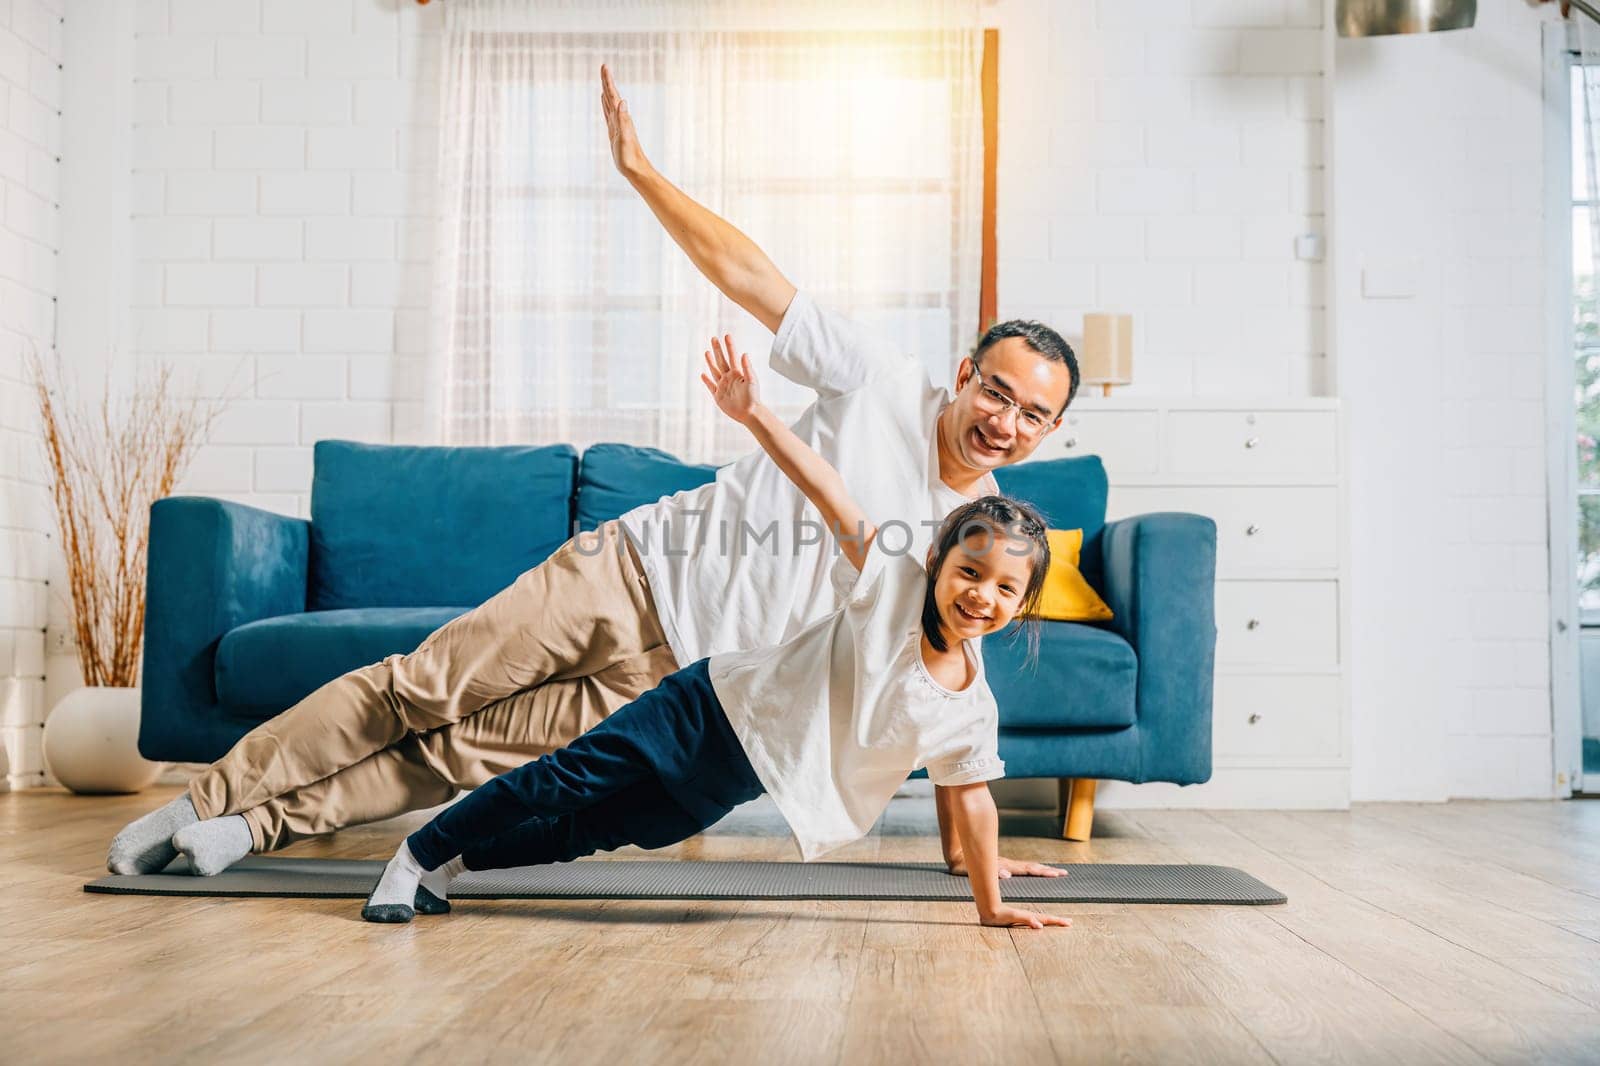 A father and his daughter find joy in yoga at home practicing togetherness happiness by Sorapop